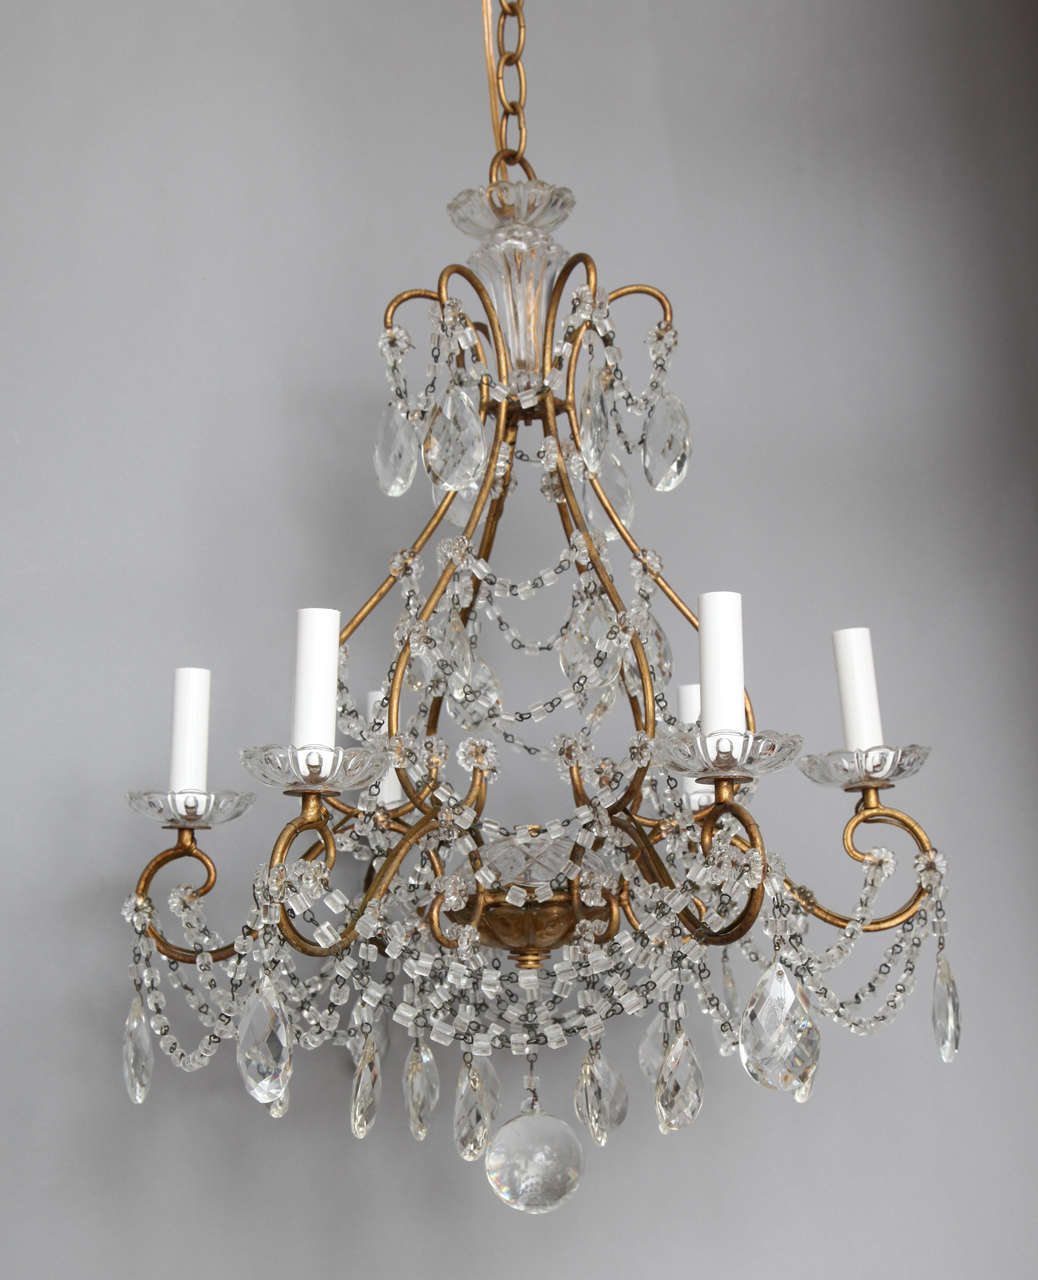 An Italian cage form gilt metal chandelier, the frame draped with strands of beads on chains.